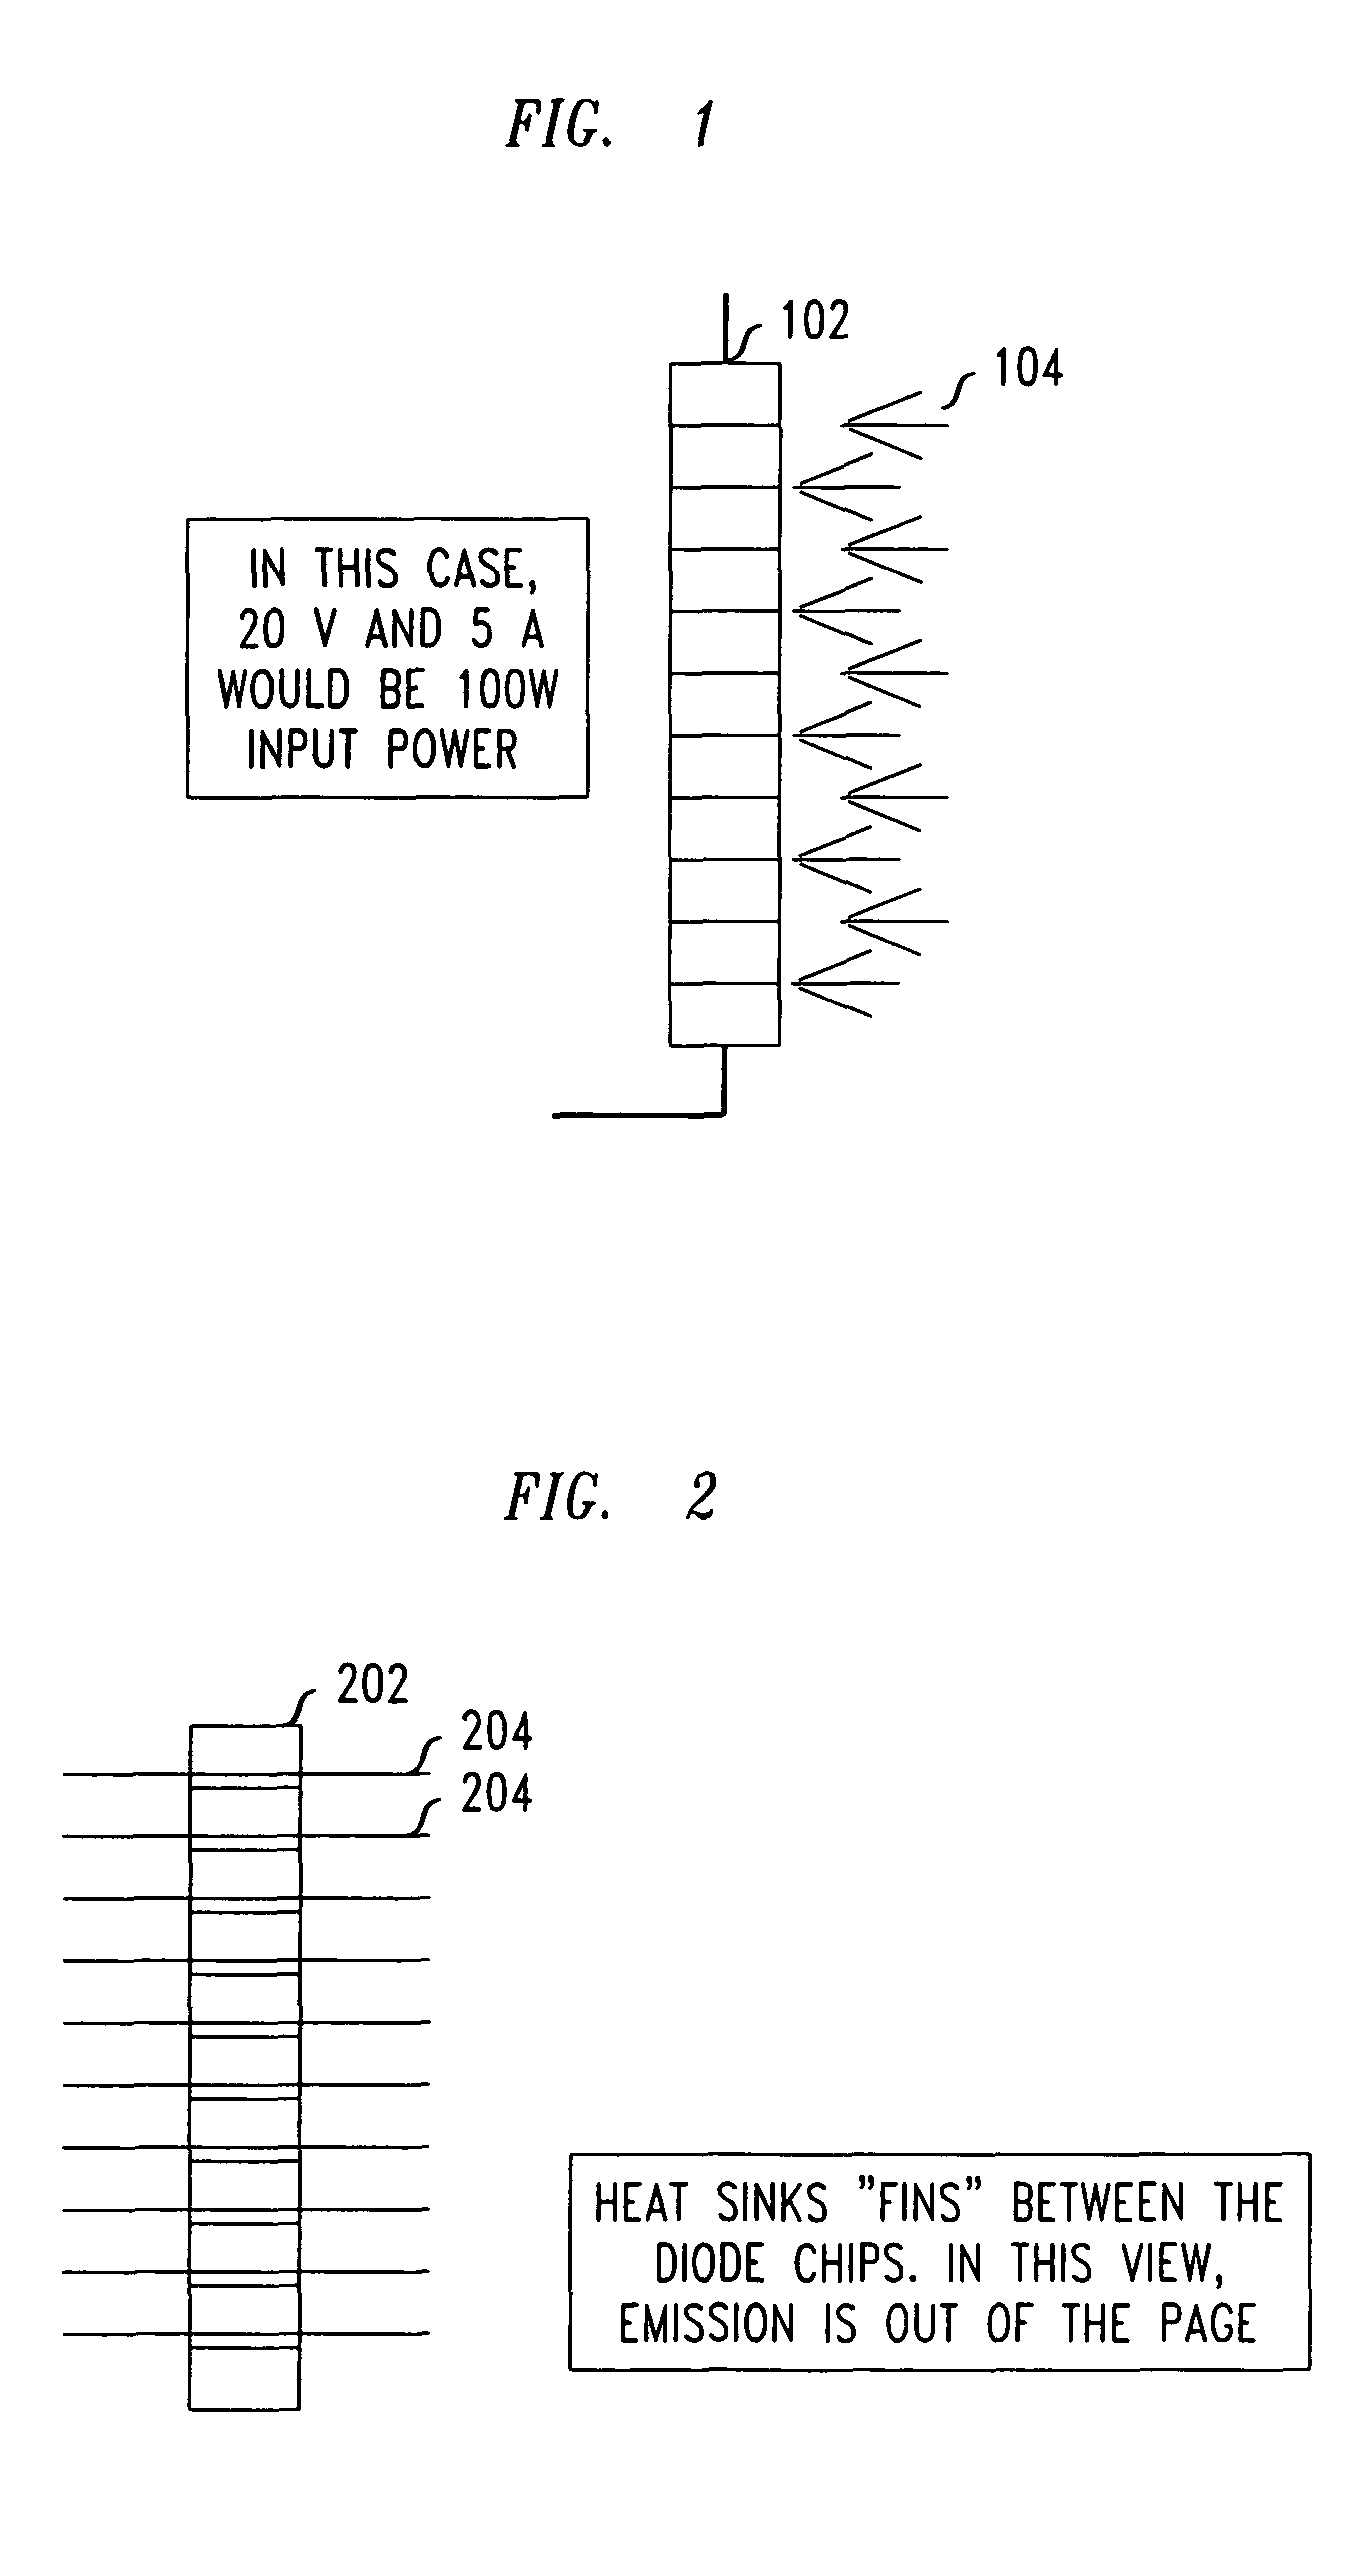 Optical dermatological and medical treatment apparatus having replaceable laser diodes